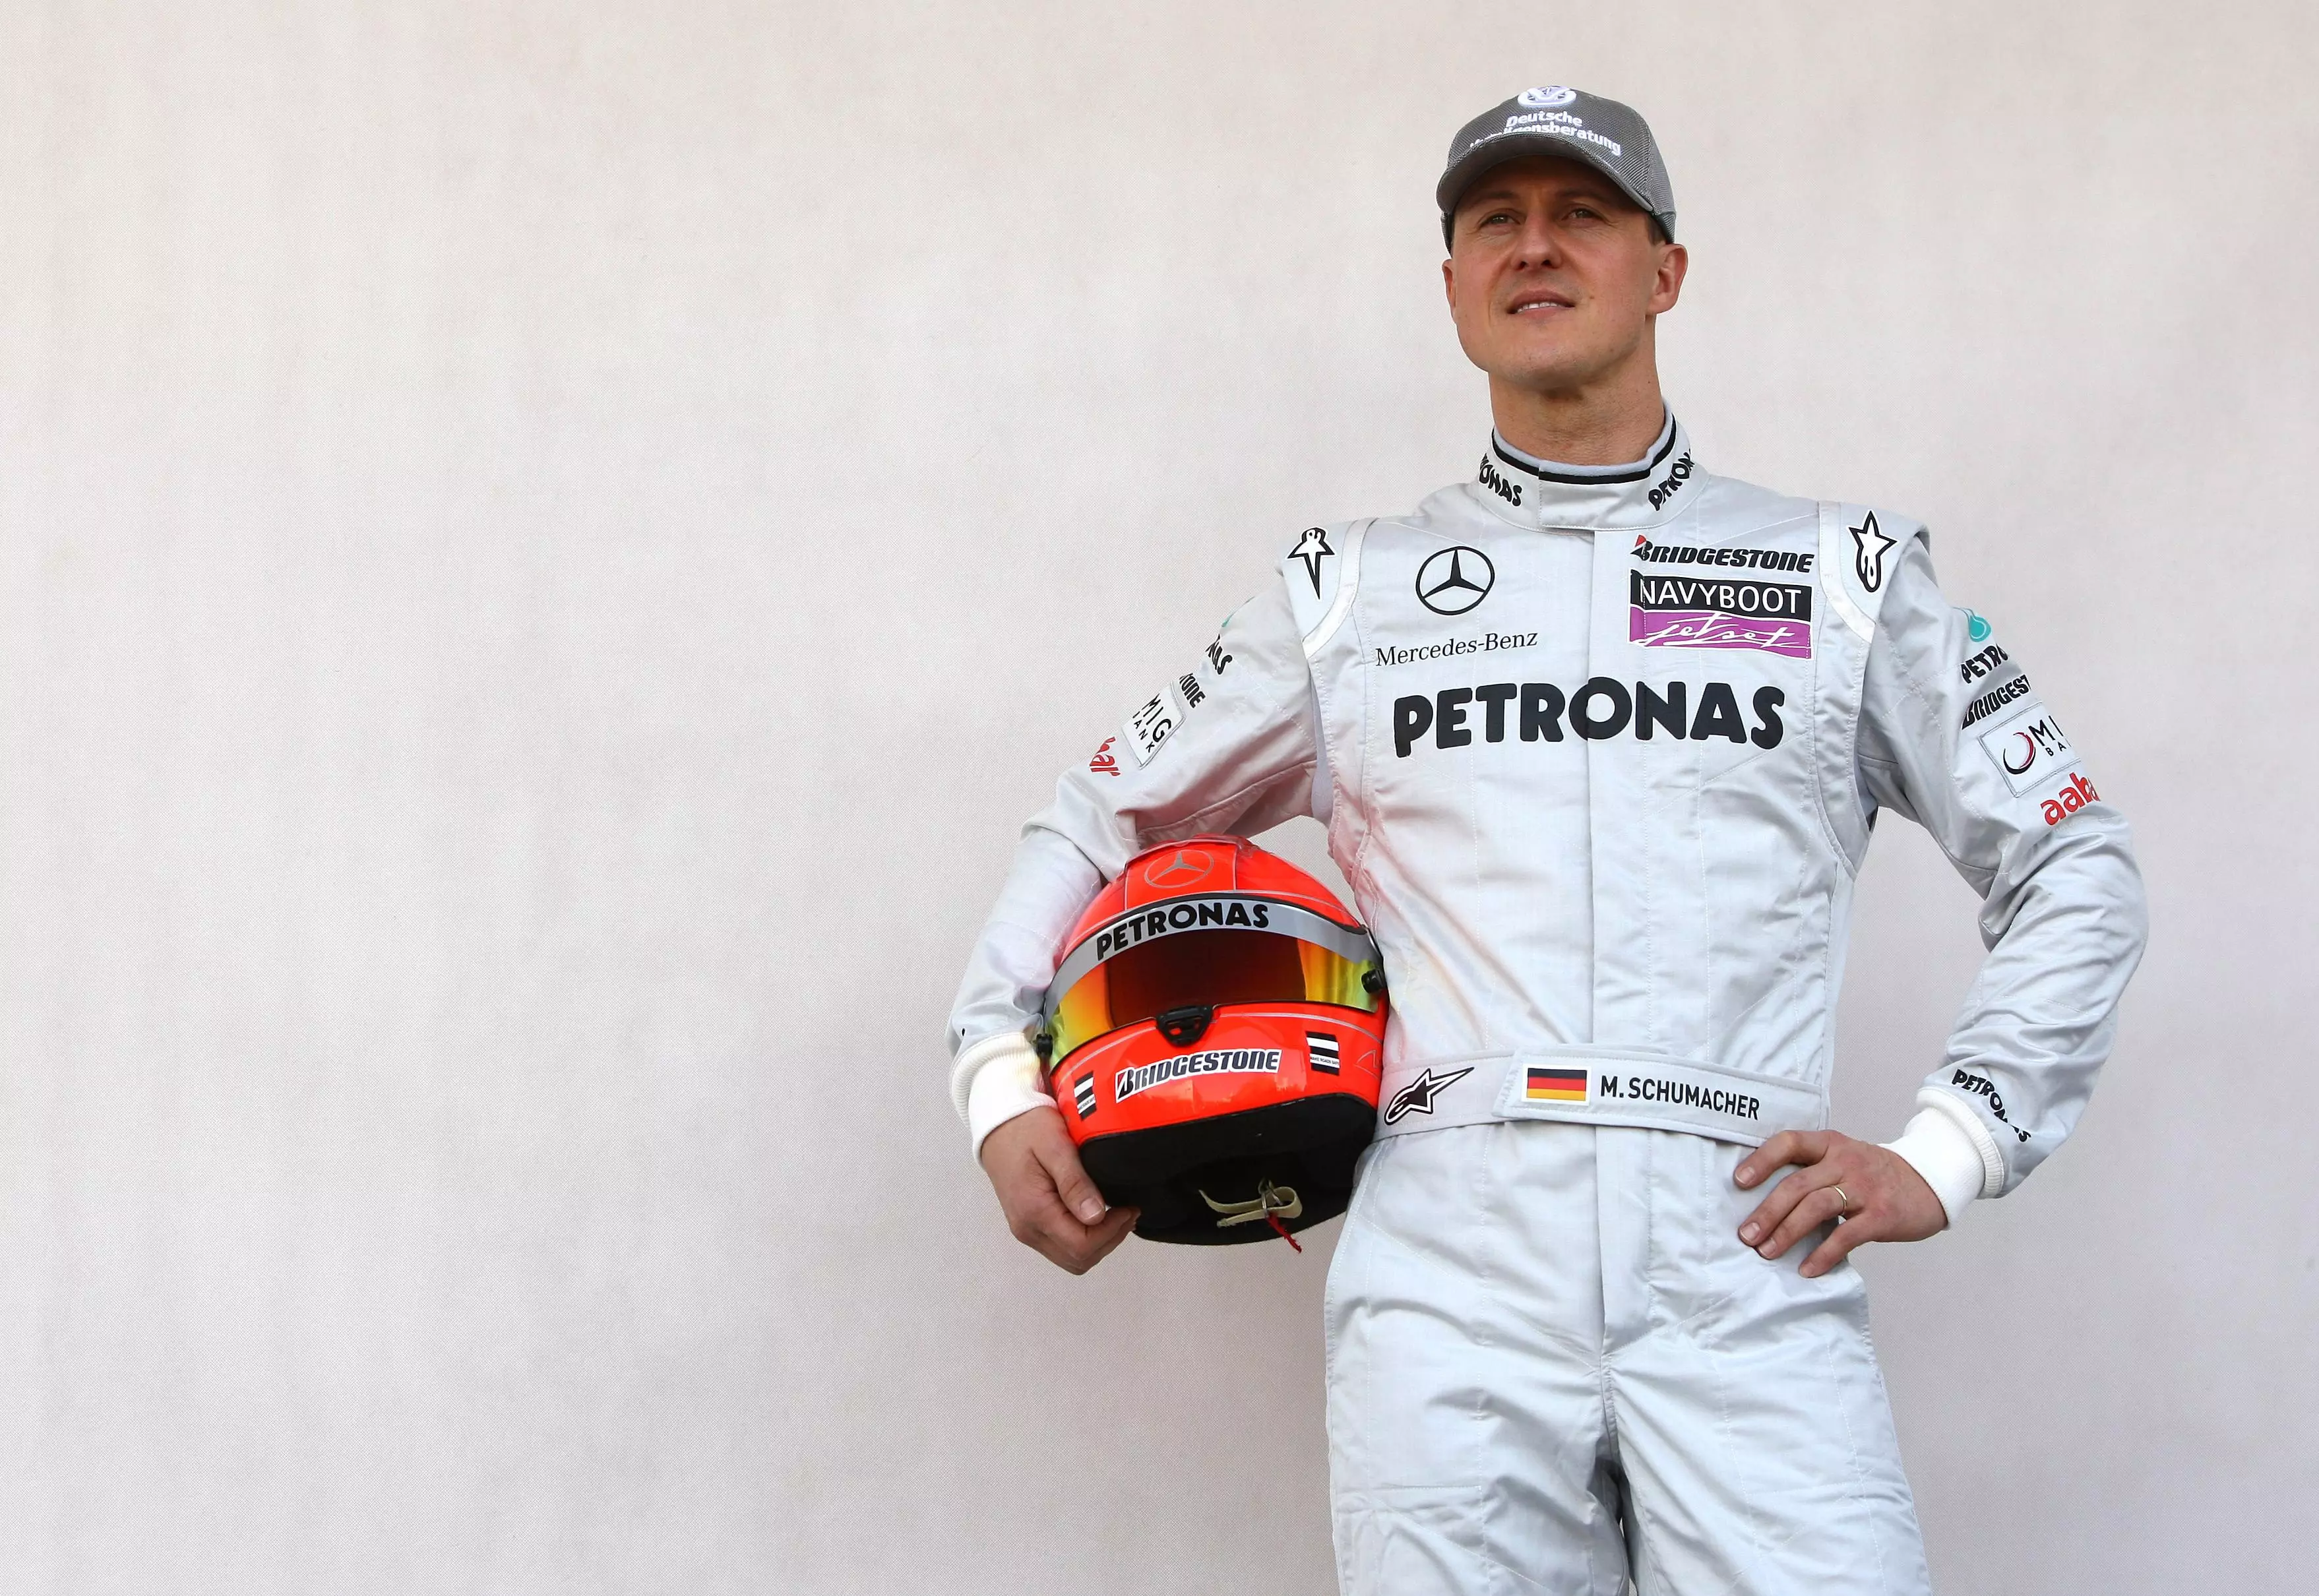 Schumacher hasn't been seen since he was involved in a skiing accident in 2013.